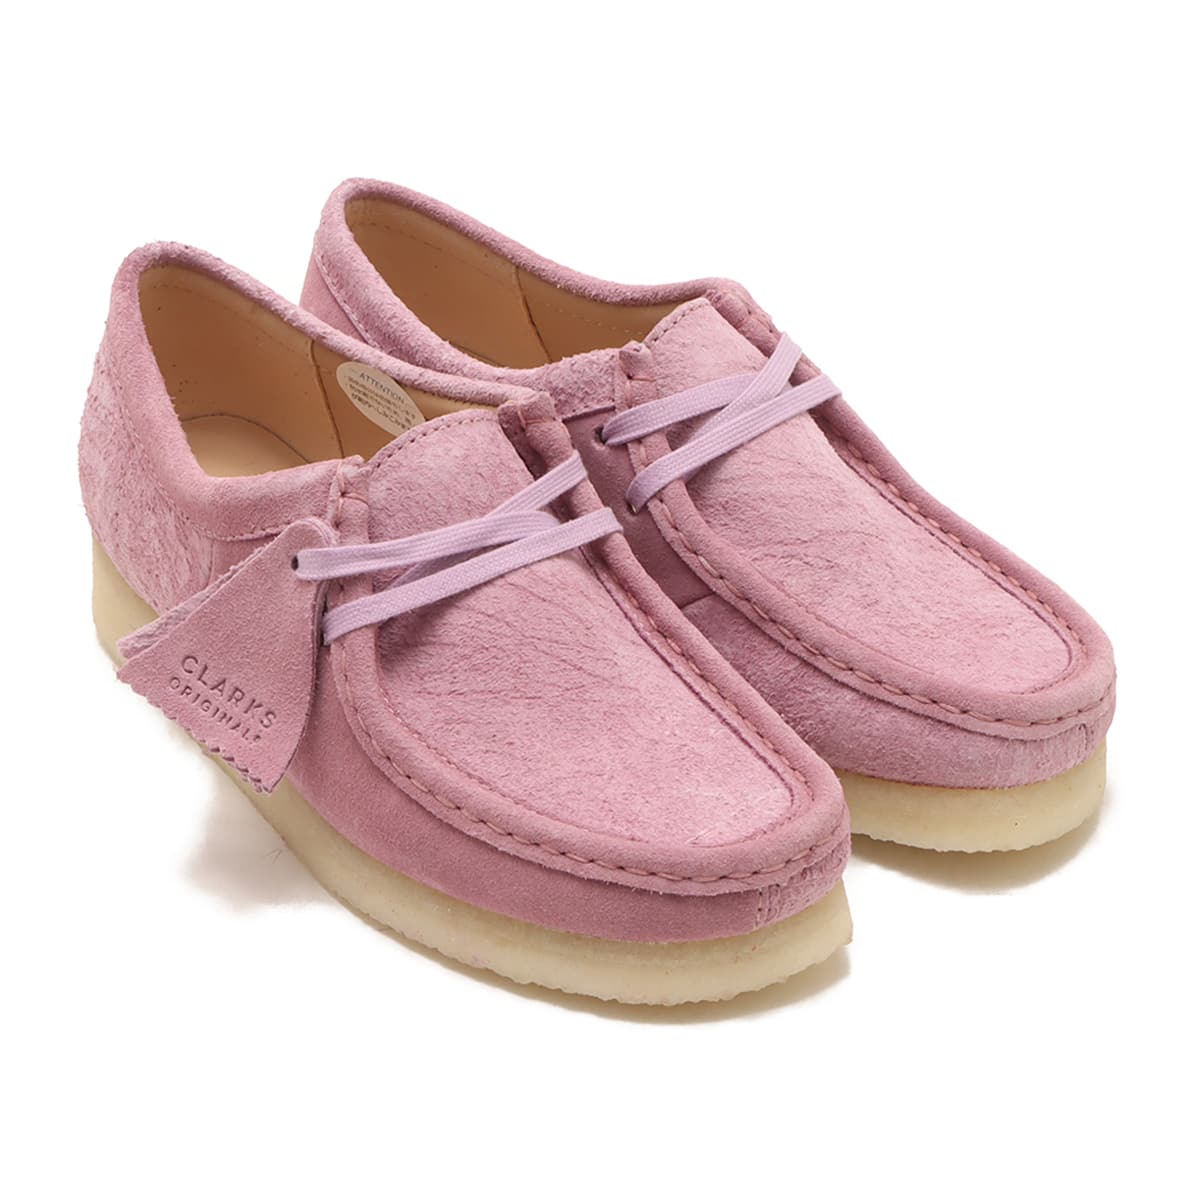 Clarks Wallabee. Pink PINK 23SP-I